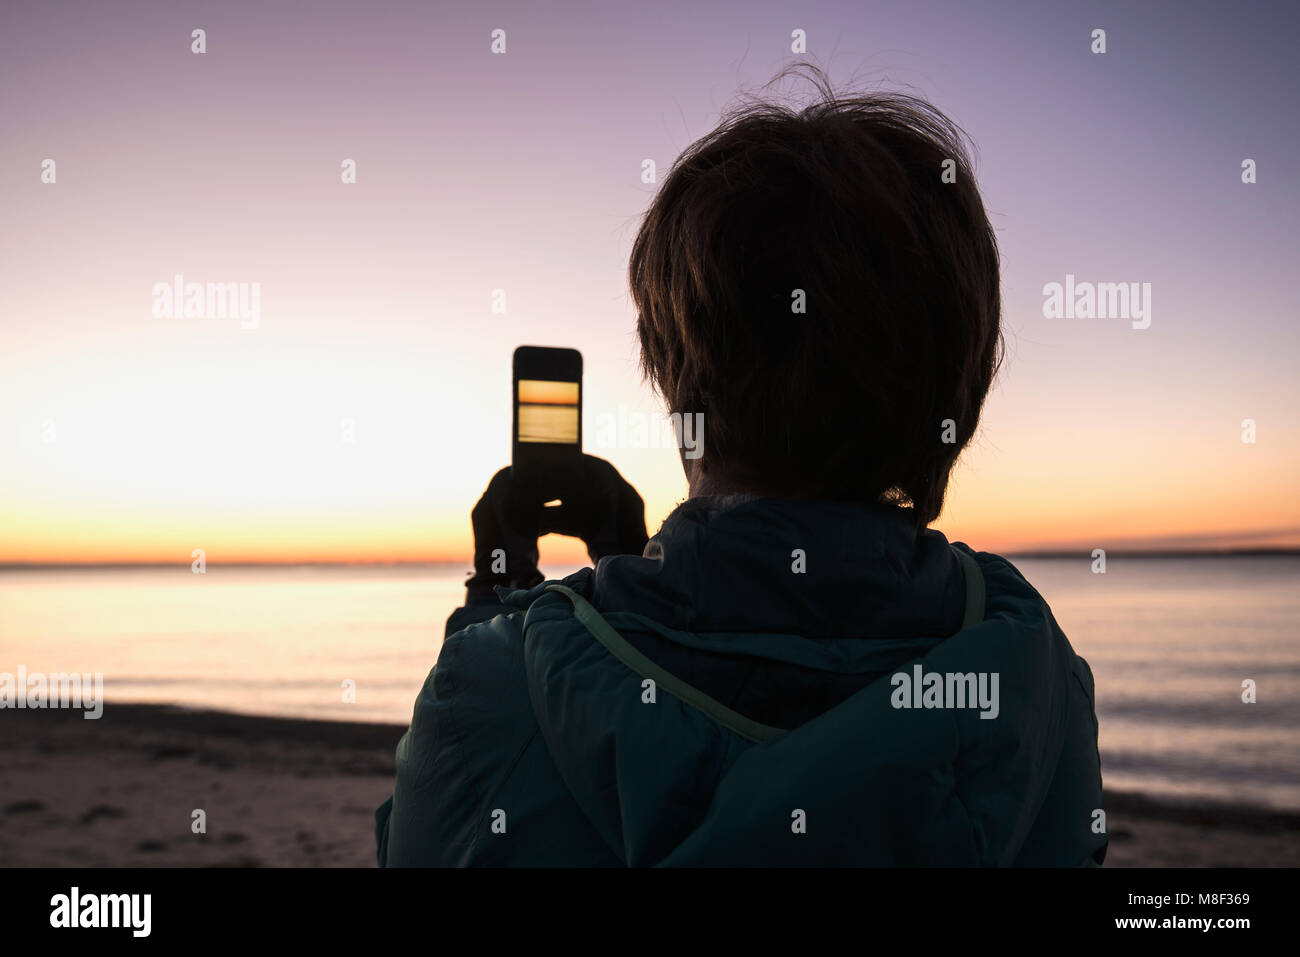 Woman on beach taking photo with smartphone Banque D'Images